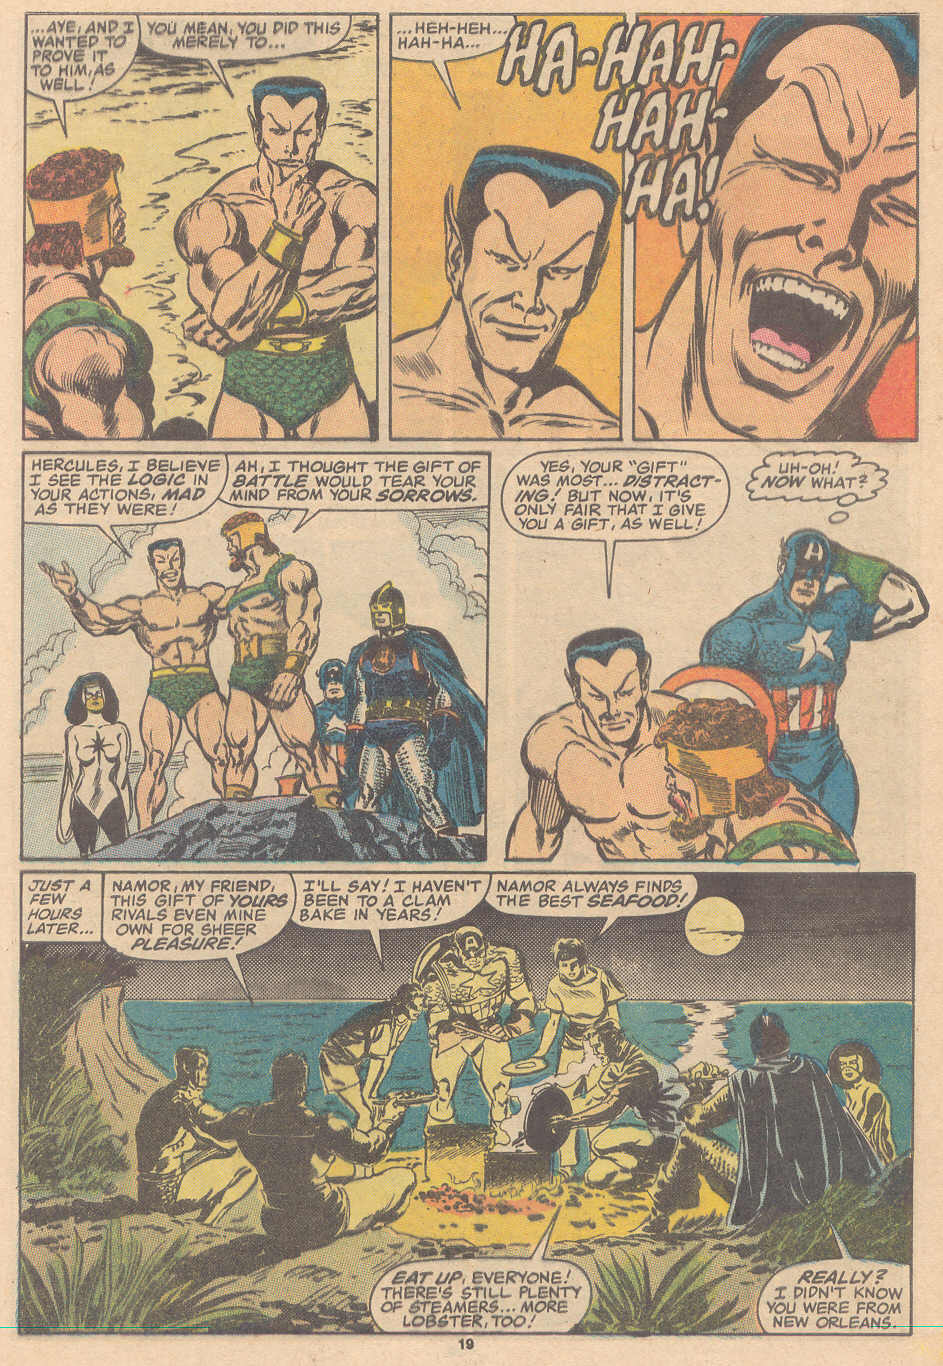 Marvel: Tough relationship of Namor with the Avengers